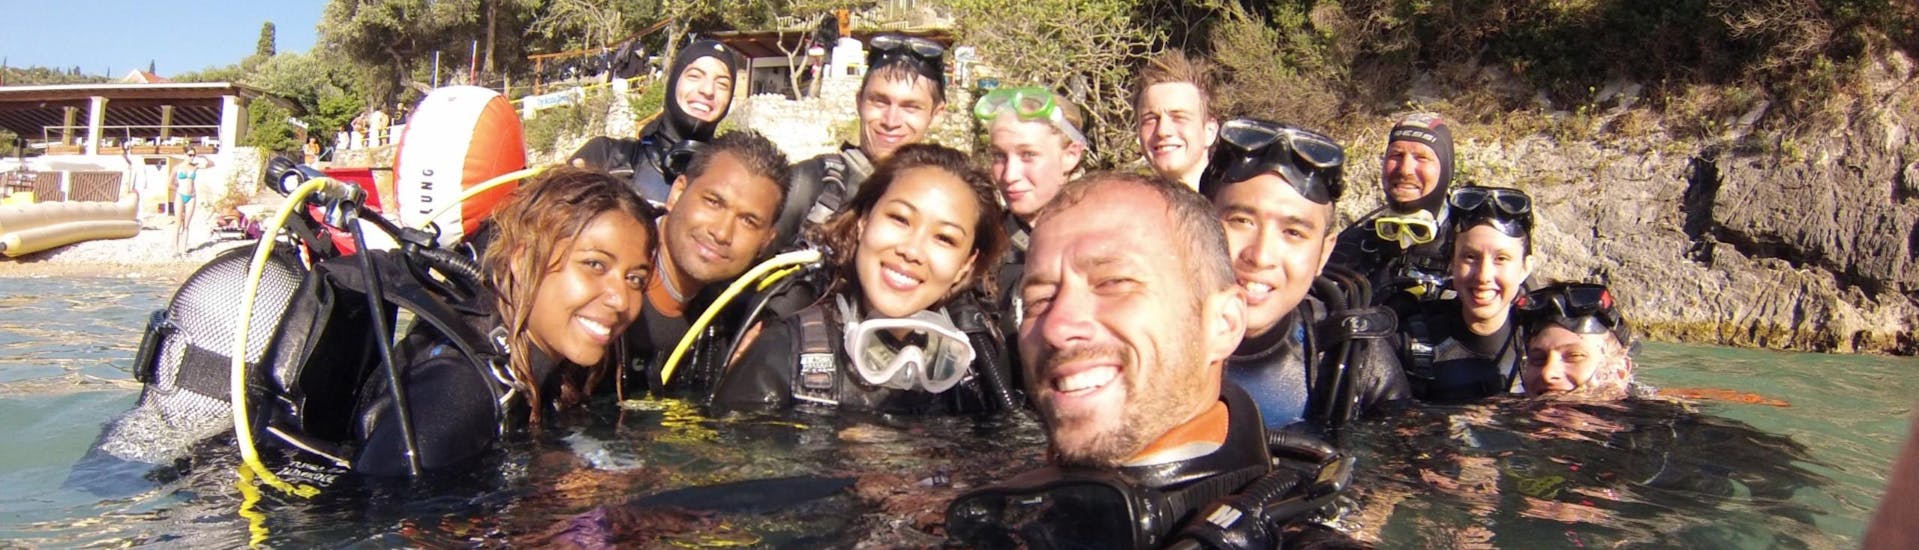 A diving instructor from Achilleon Diving Center Corfu is taking a selfie with a group of people taking part in the Guided Boat Dives at Othonoi Island for Certified Divers.